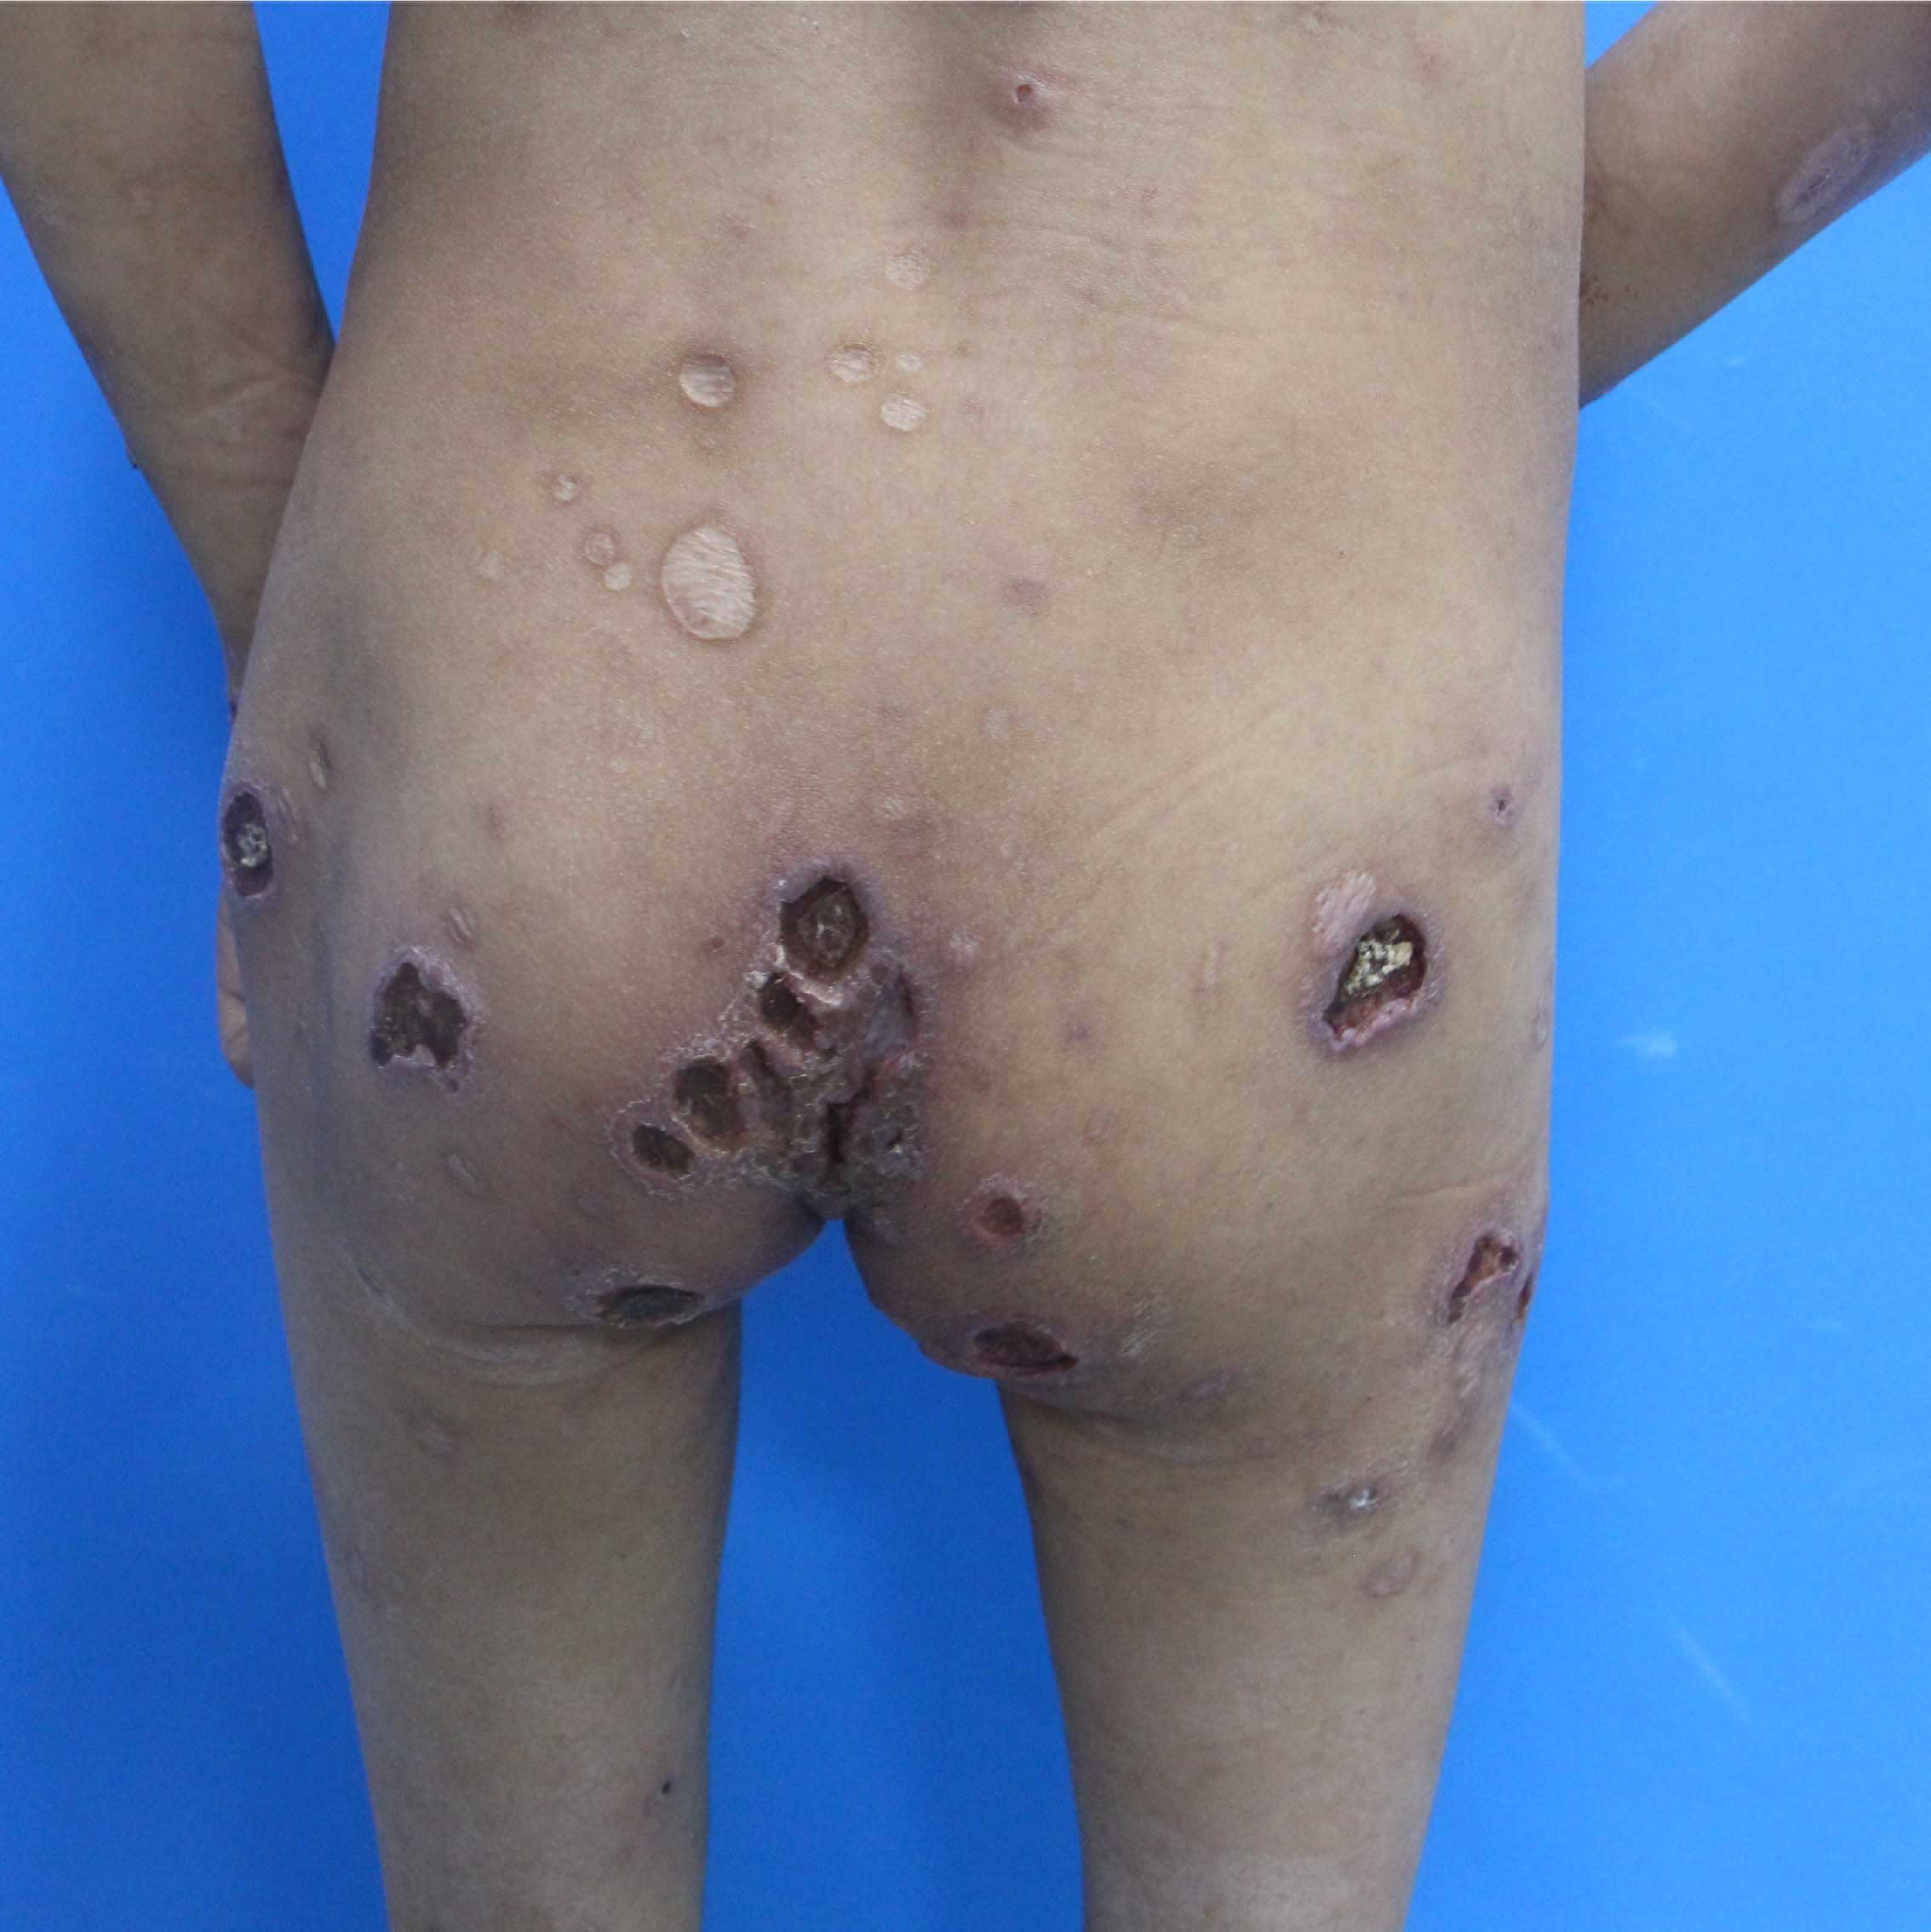 Deep ulcers, hemorrhagic crusts, hyperpigmented or hypopigmented spots and superficial atrophic scars on the trunk and extremities